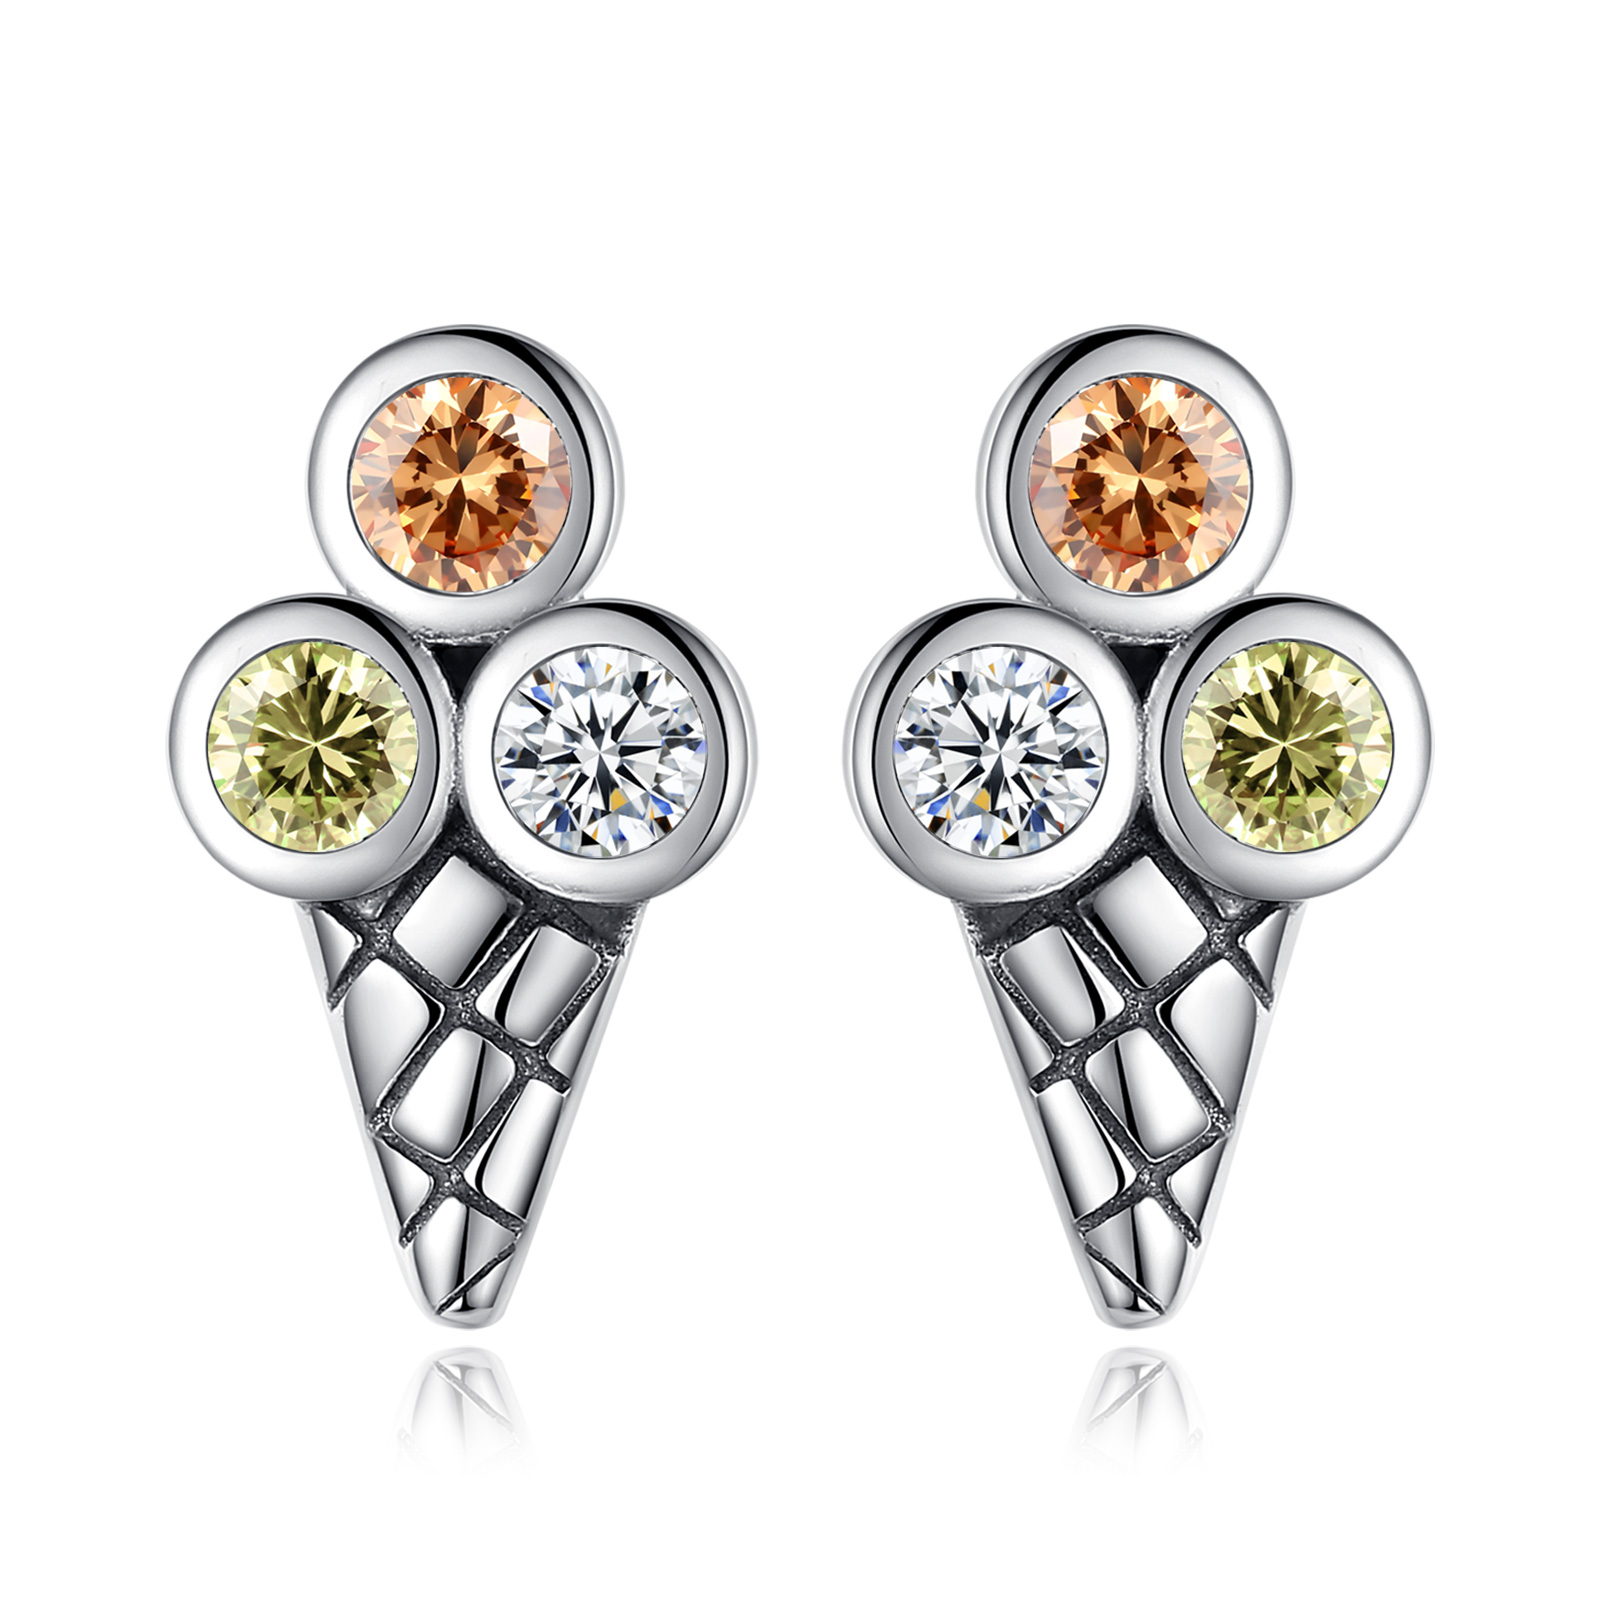 Merryshine Jewelry S925 Sterling Silver Ice Cream Stud Earrings with Colorful Cubic Zirconia